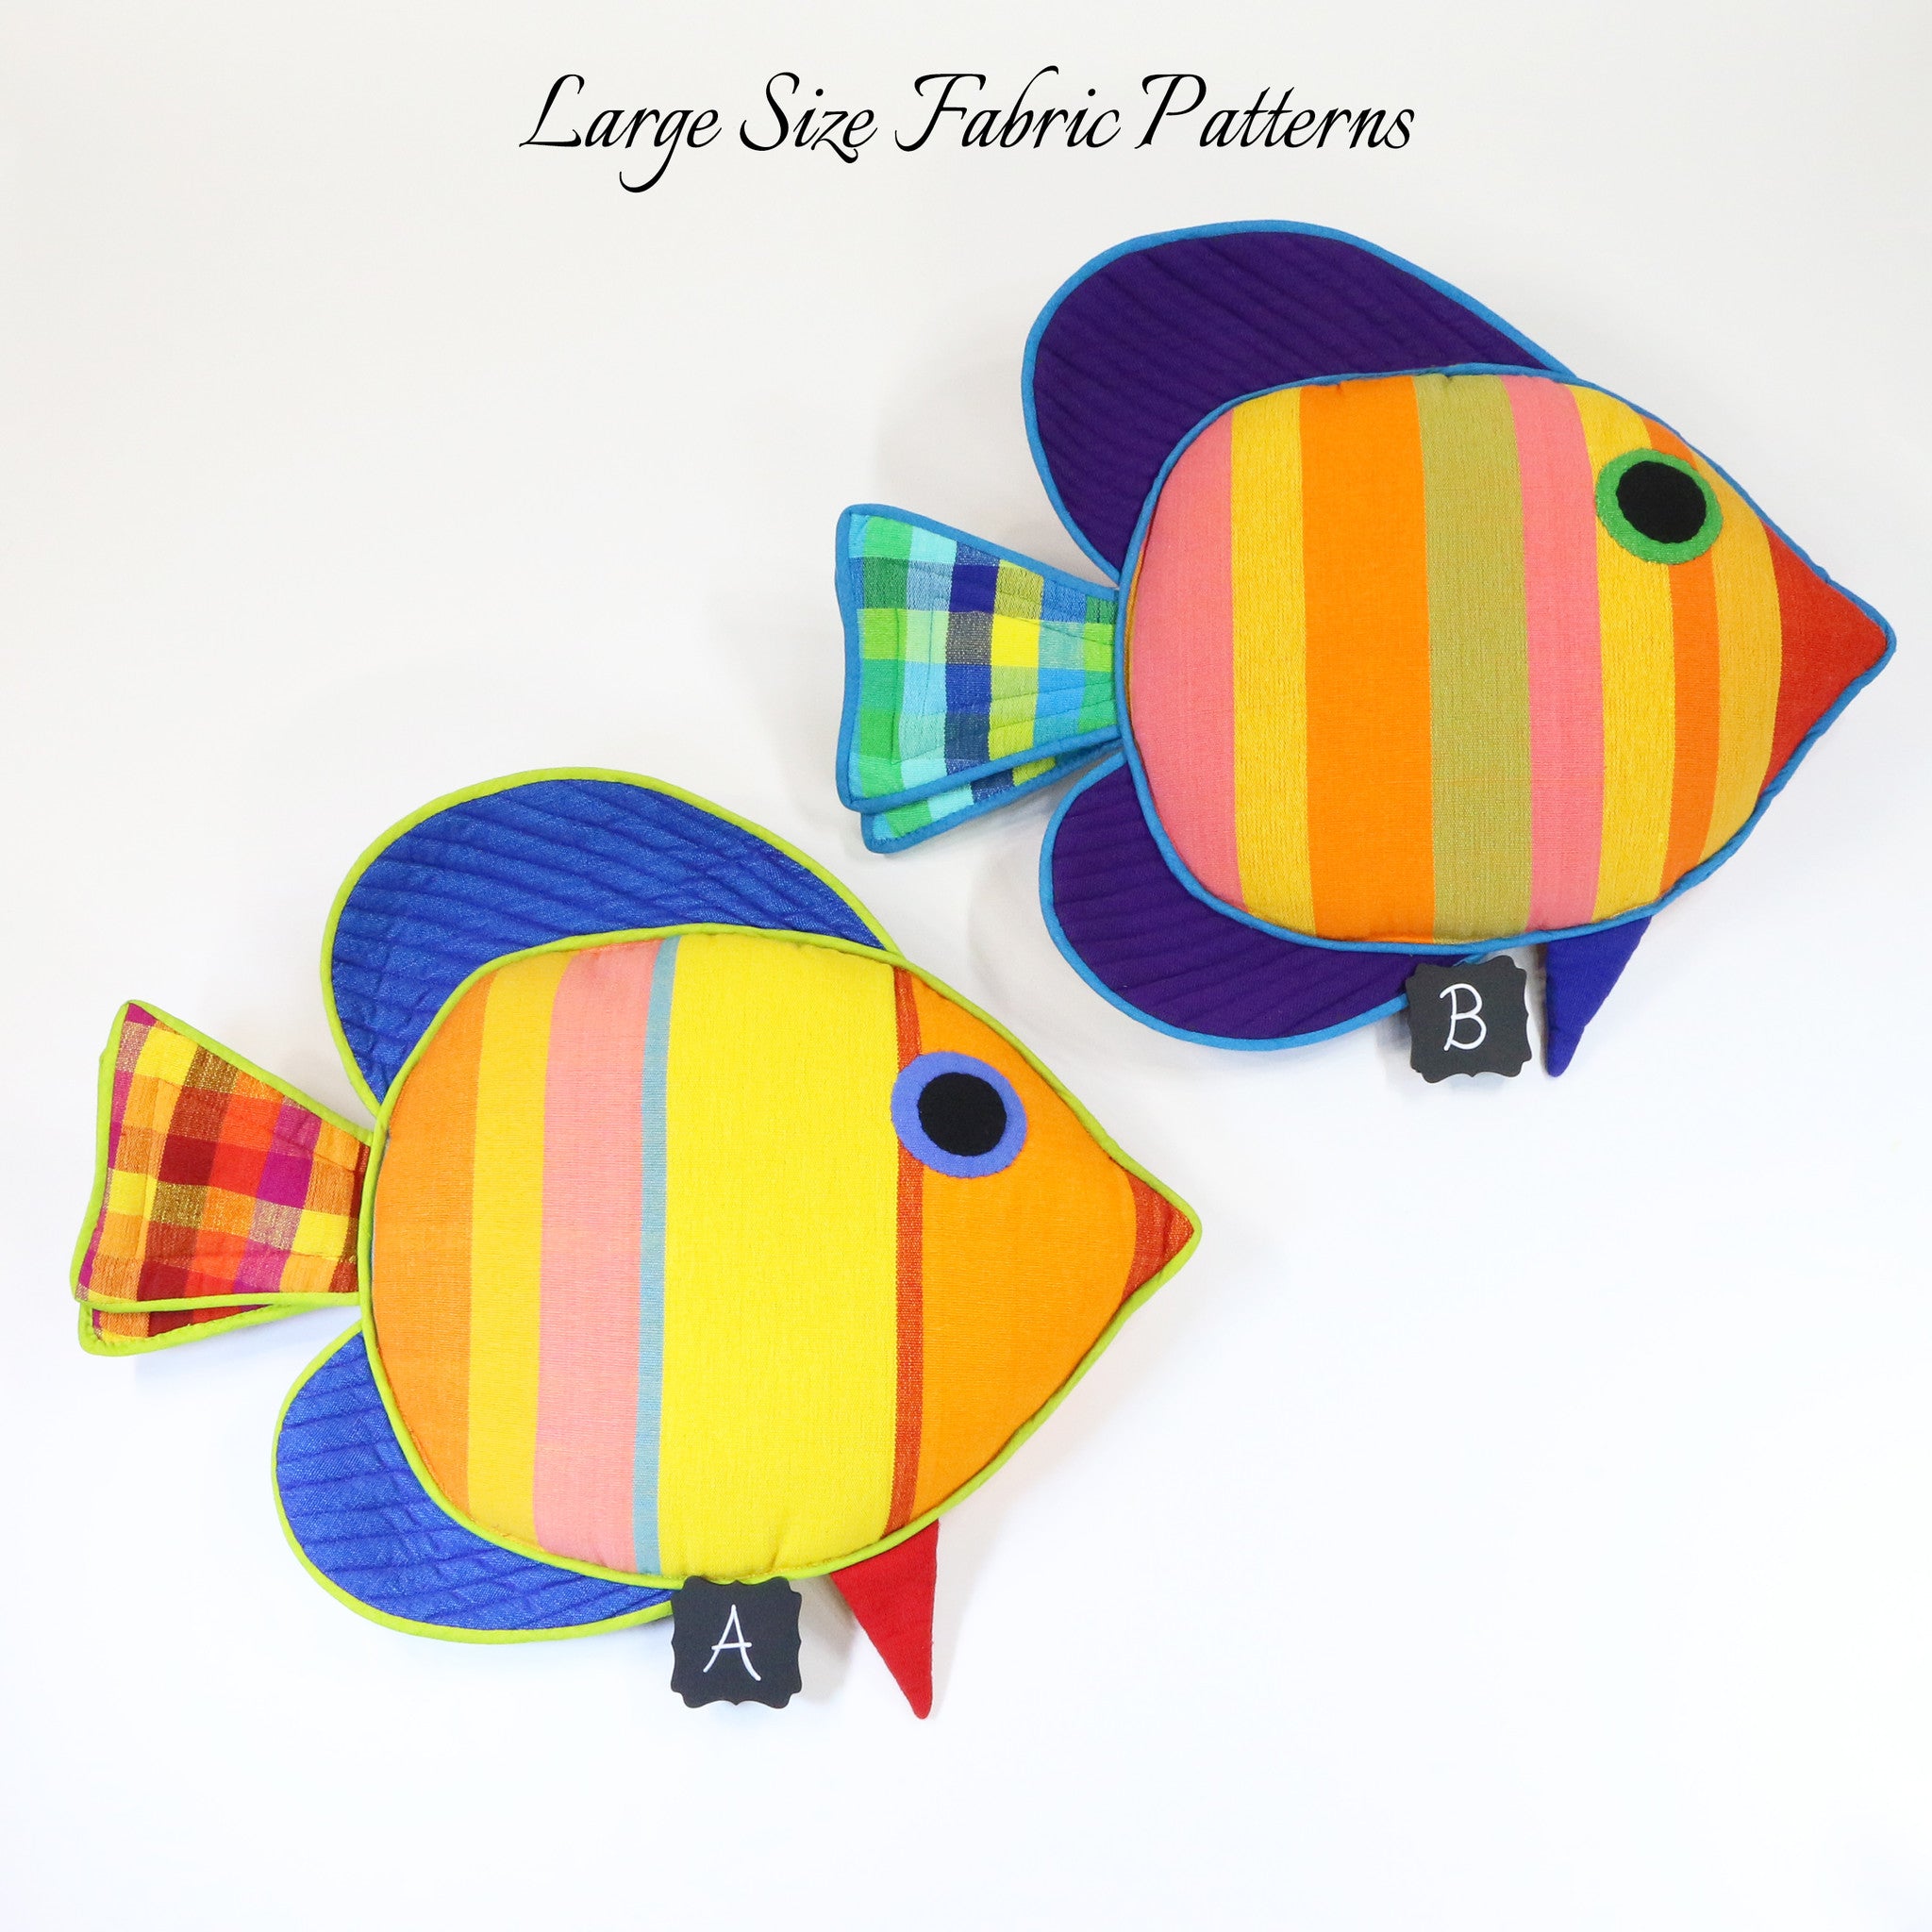 Daisy, the Sail Fin Fish – large size fabric patterns shown